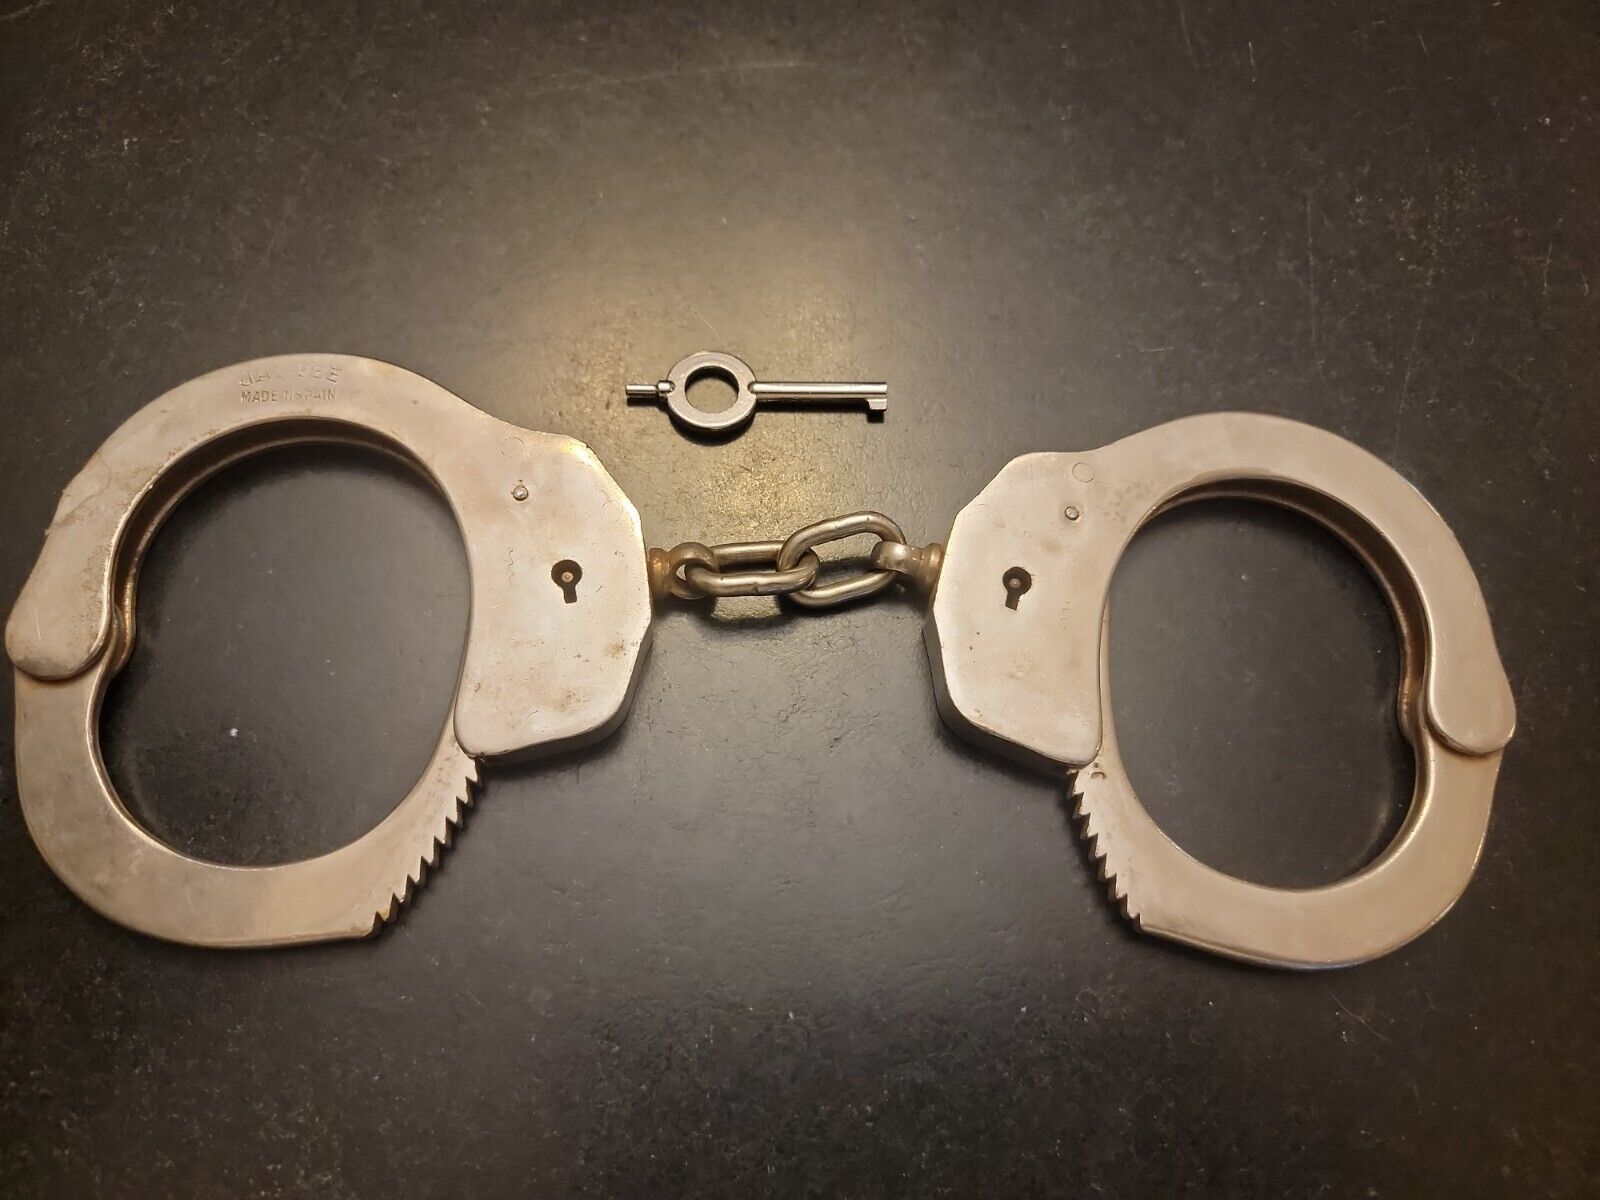 Vintage Jay-Pee Handcuffs with Key (Made in Spain) Heavy